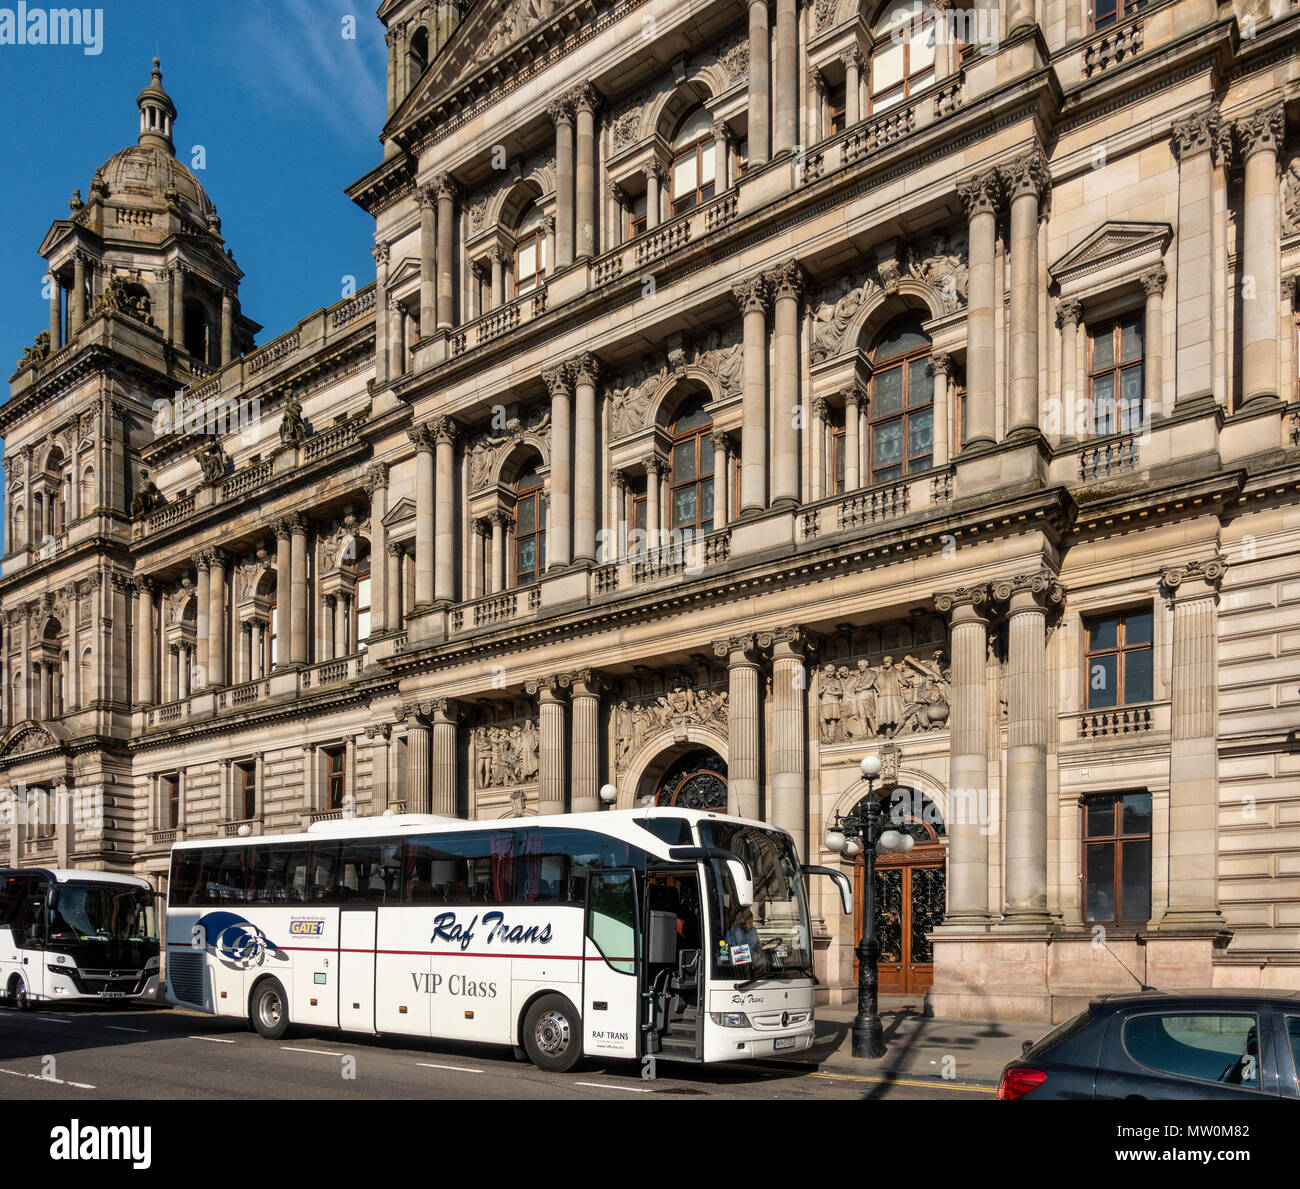 A Raf Trans luxury coach outside Glasgow City Chambers, the Town Hall in George Square in the city centre. Scotland, UK. Stock Photo